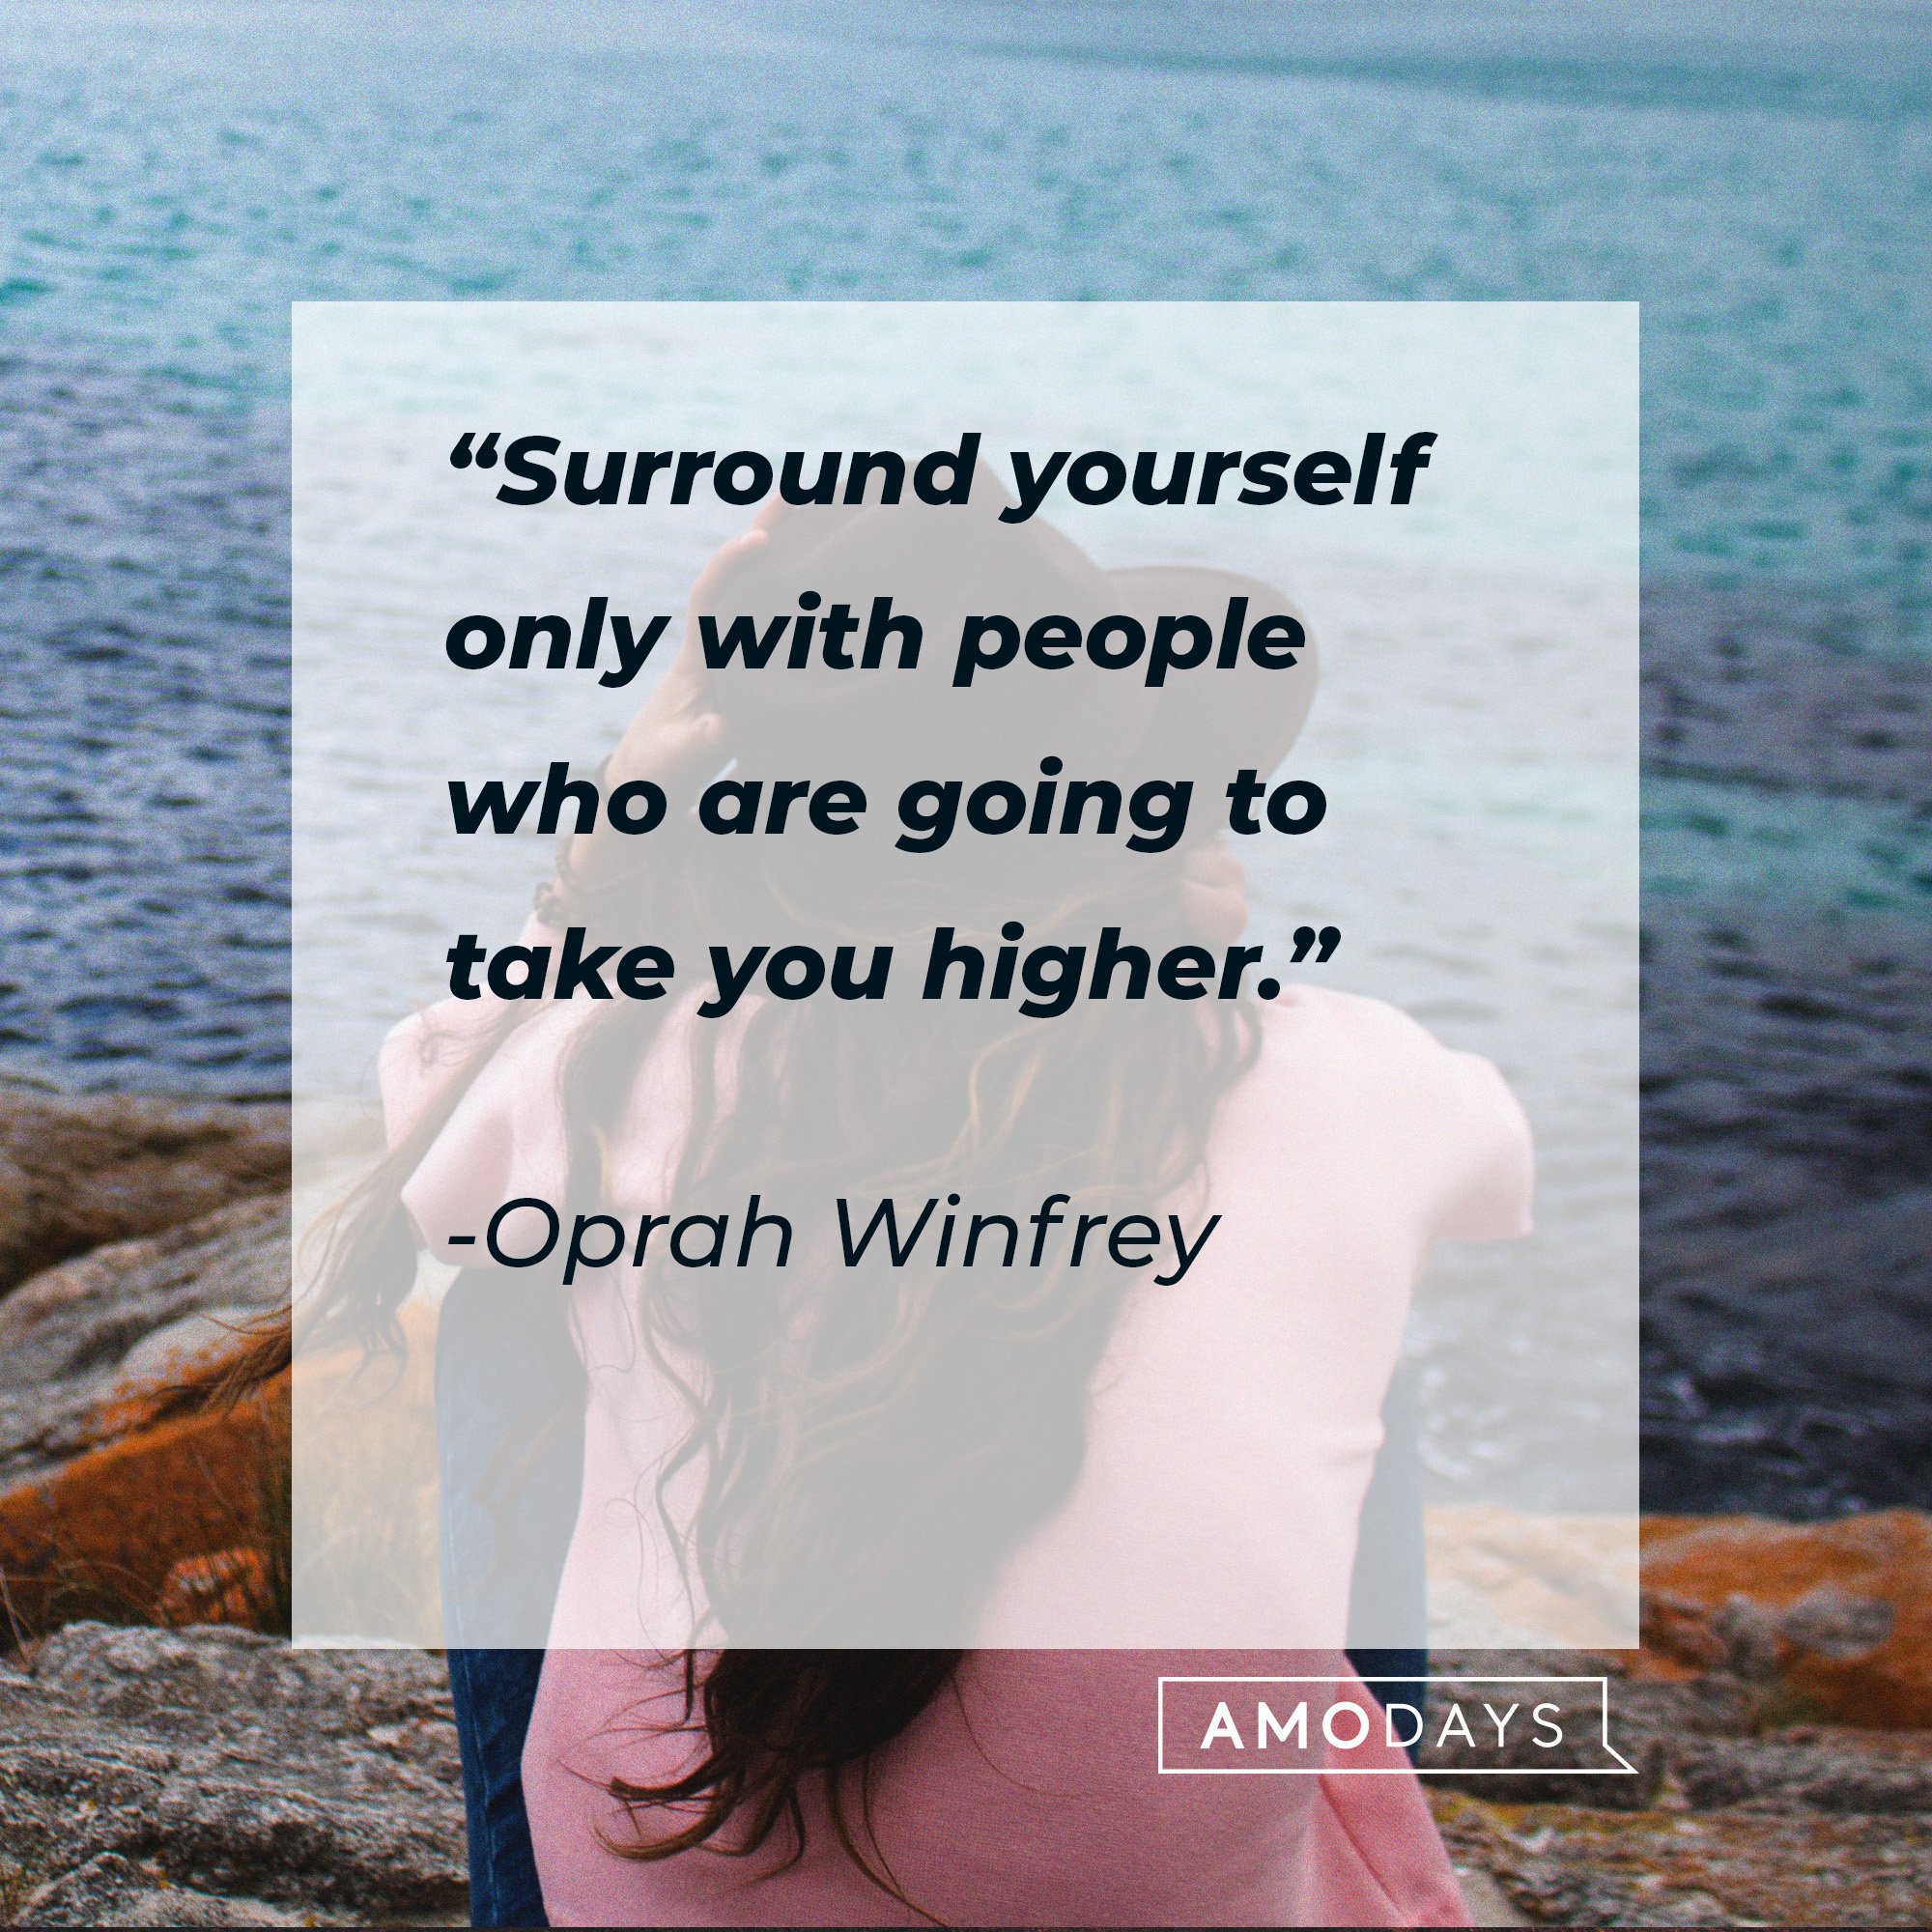 Oprah Winfrey's quote: “Surround yourself only with people who are going to take you higher.” | Image: AmoDays